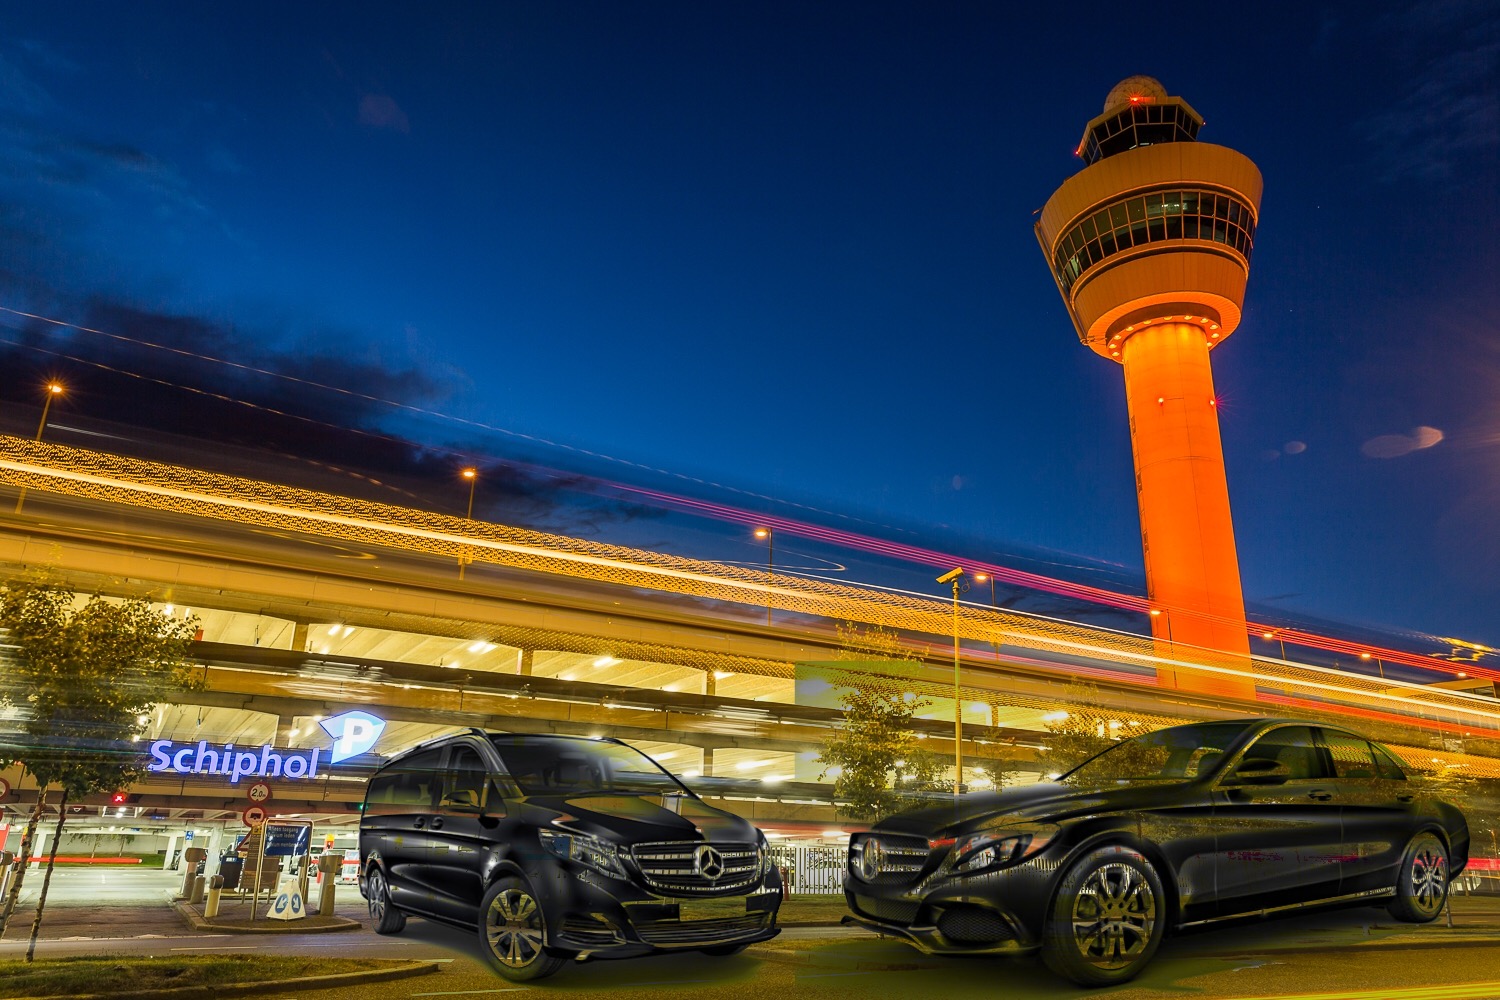 STH Taxi Schiphol